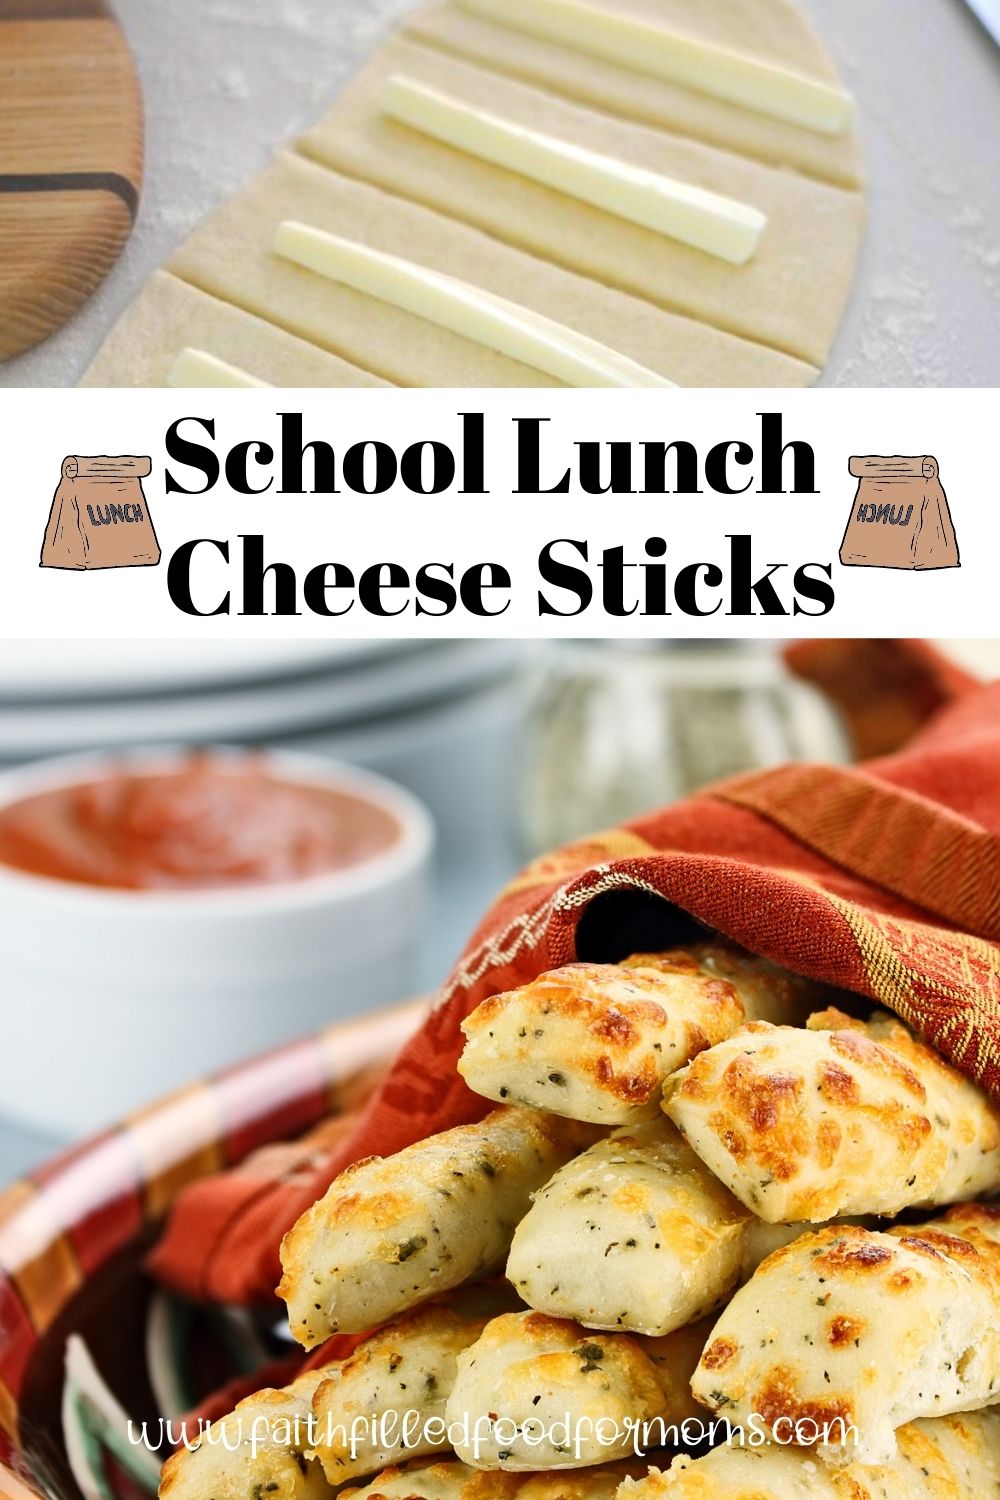 School lunch cheese snacks. Dough with slices of mozzarella cheese on it ready to roll up into a stick and cheese sticks in a serving dish after cooking ready to serve.